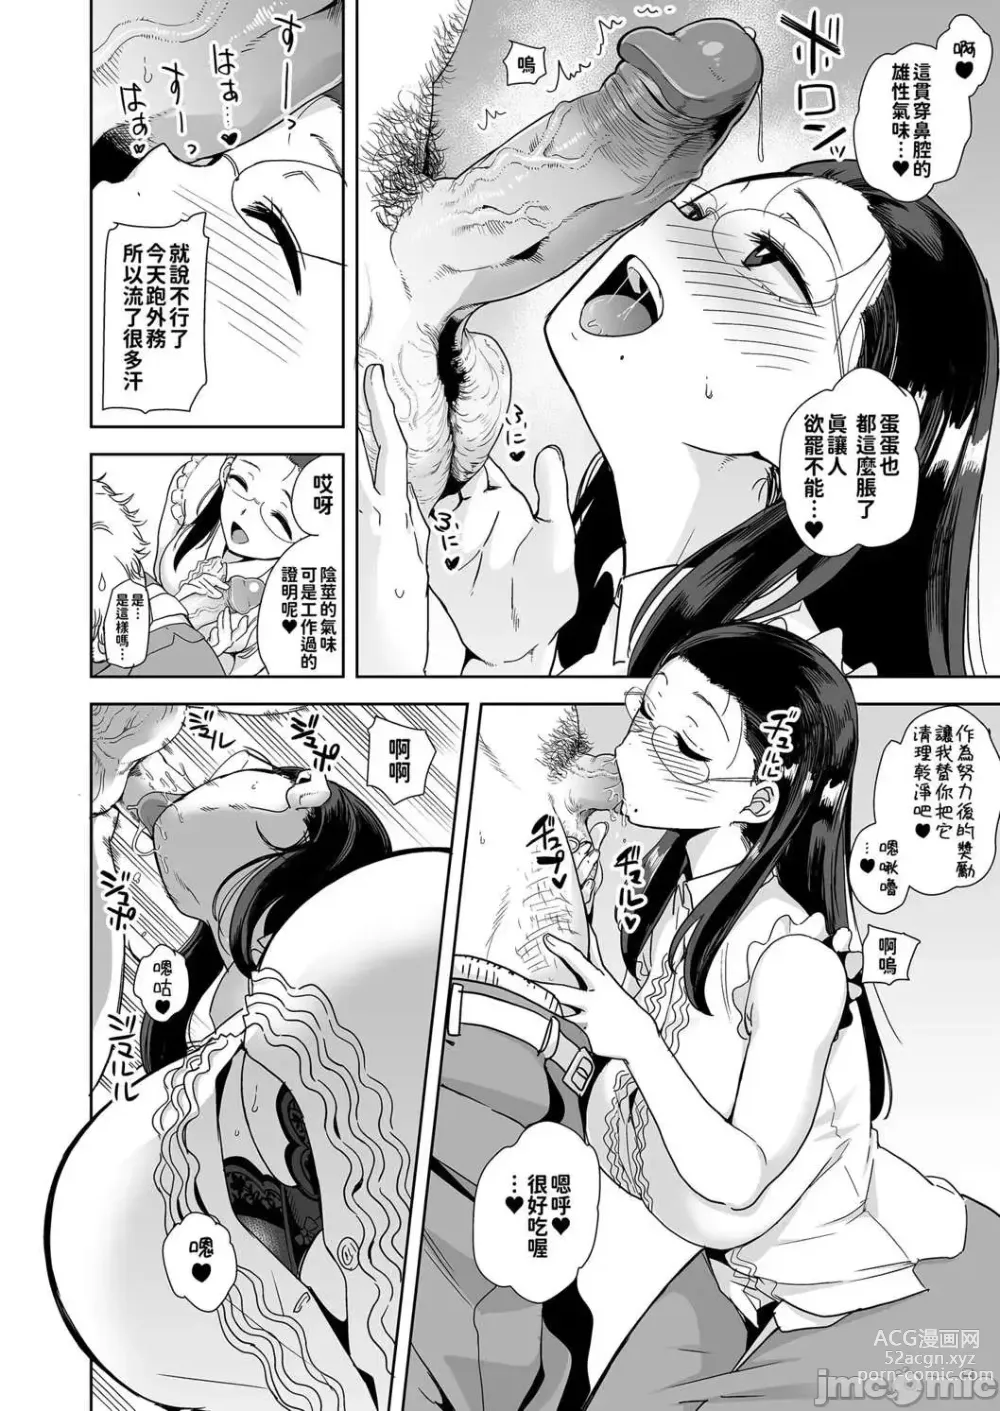 Page 7 of doujinshi Seika Girls Academys Officially Approved Prostitute Man 1 + 2